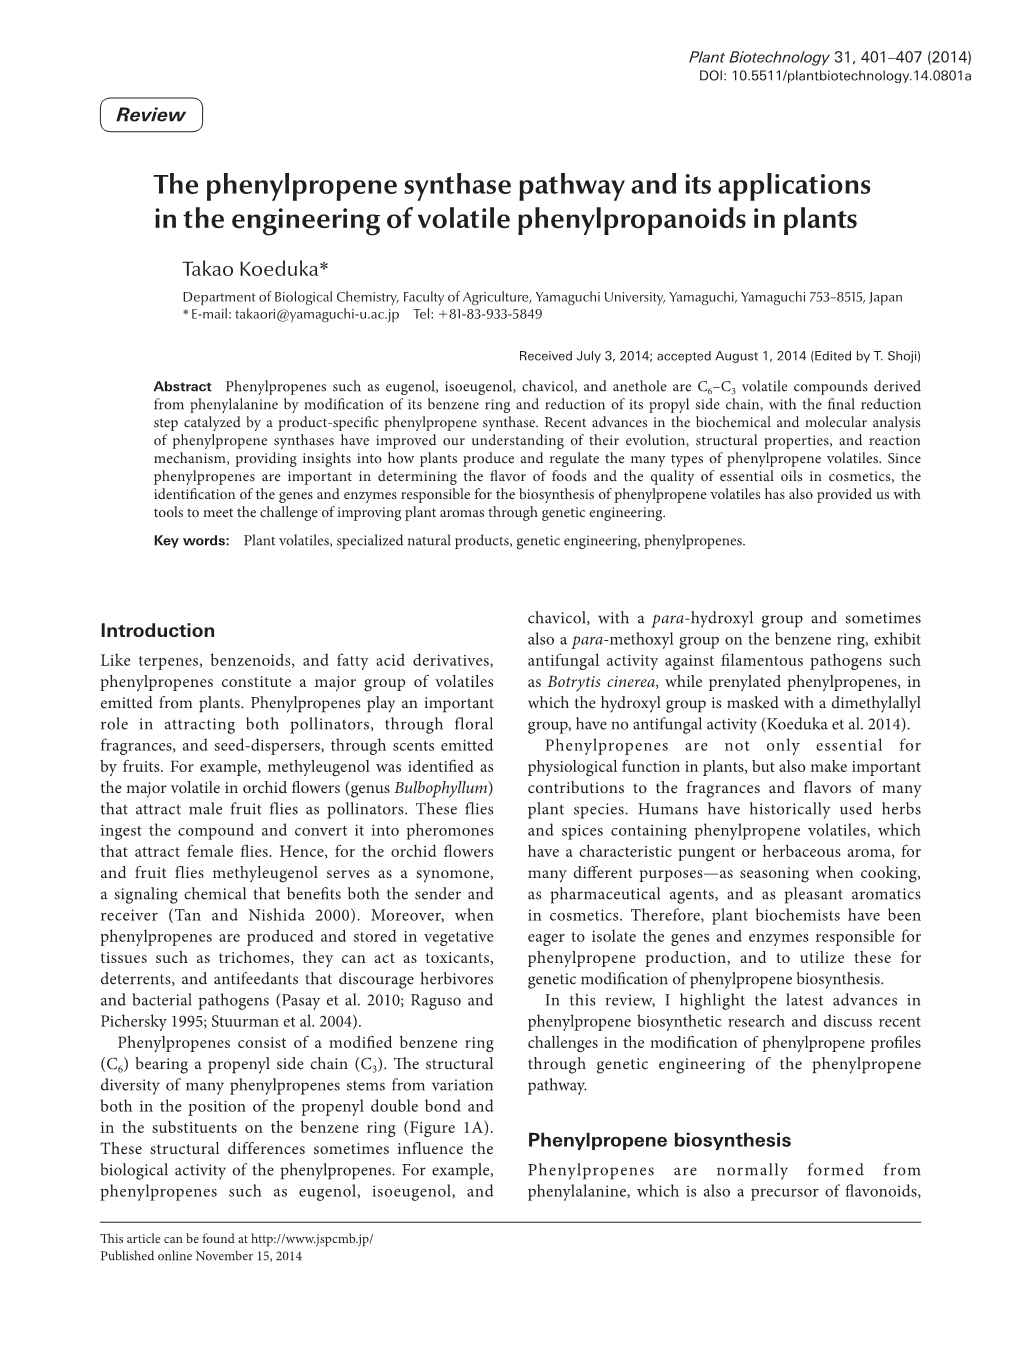 The Phenylpropene Synthase Pathway and Its Applications in the Engineering of Volatile Phenylpropanoids in Plants